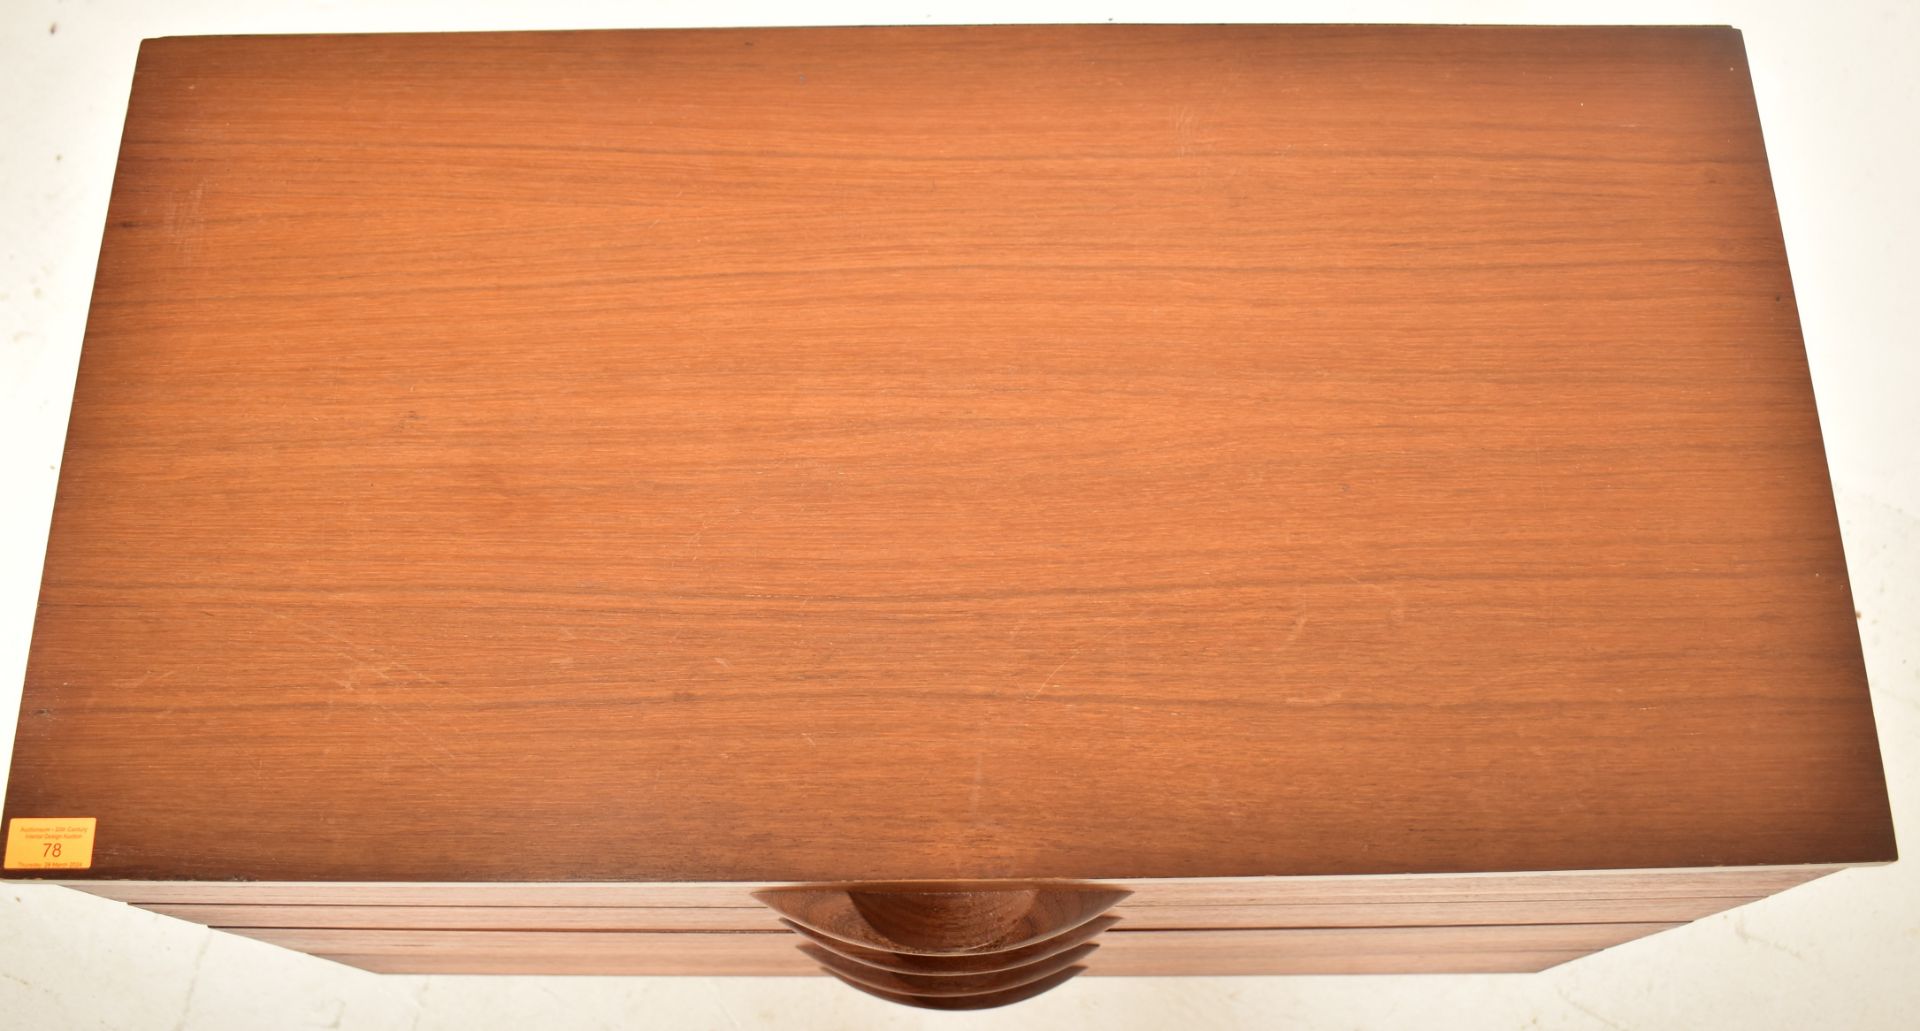 AVALON - MID CENTURY TEAK CHEST OF FOUR DRAWERS - Image 2 of 6